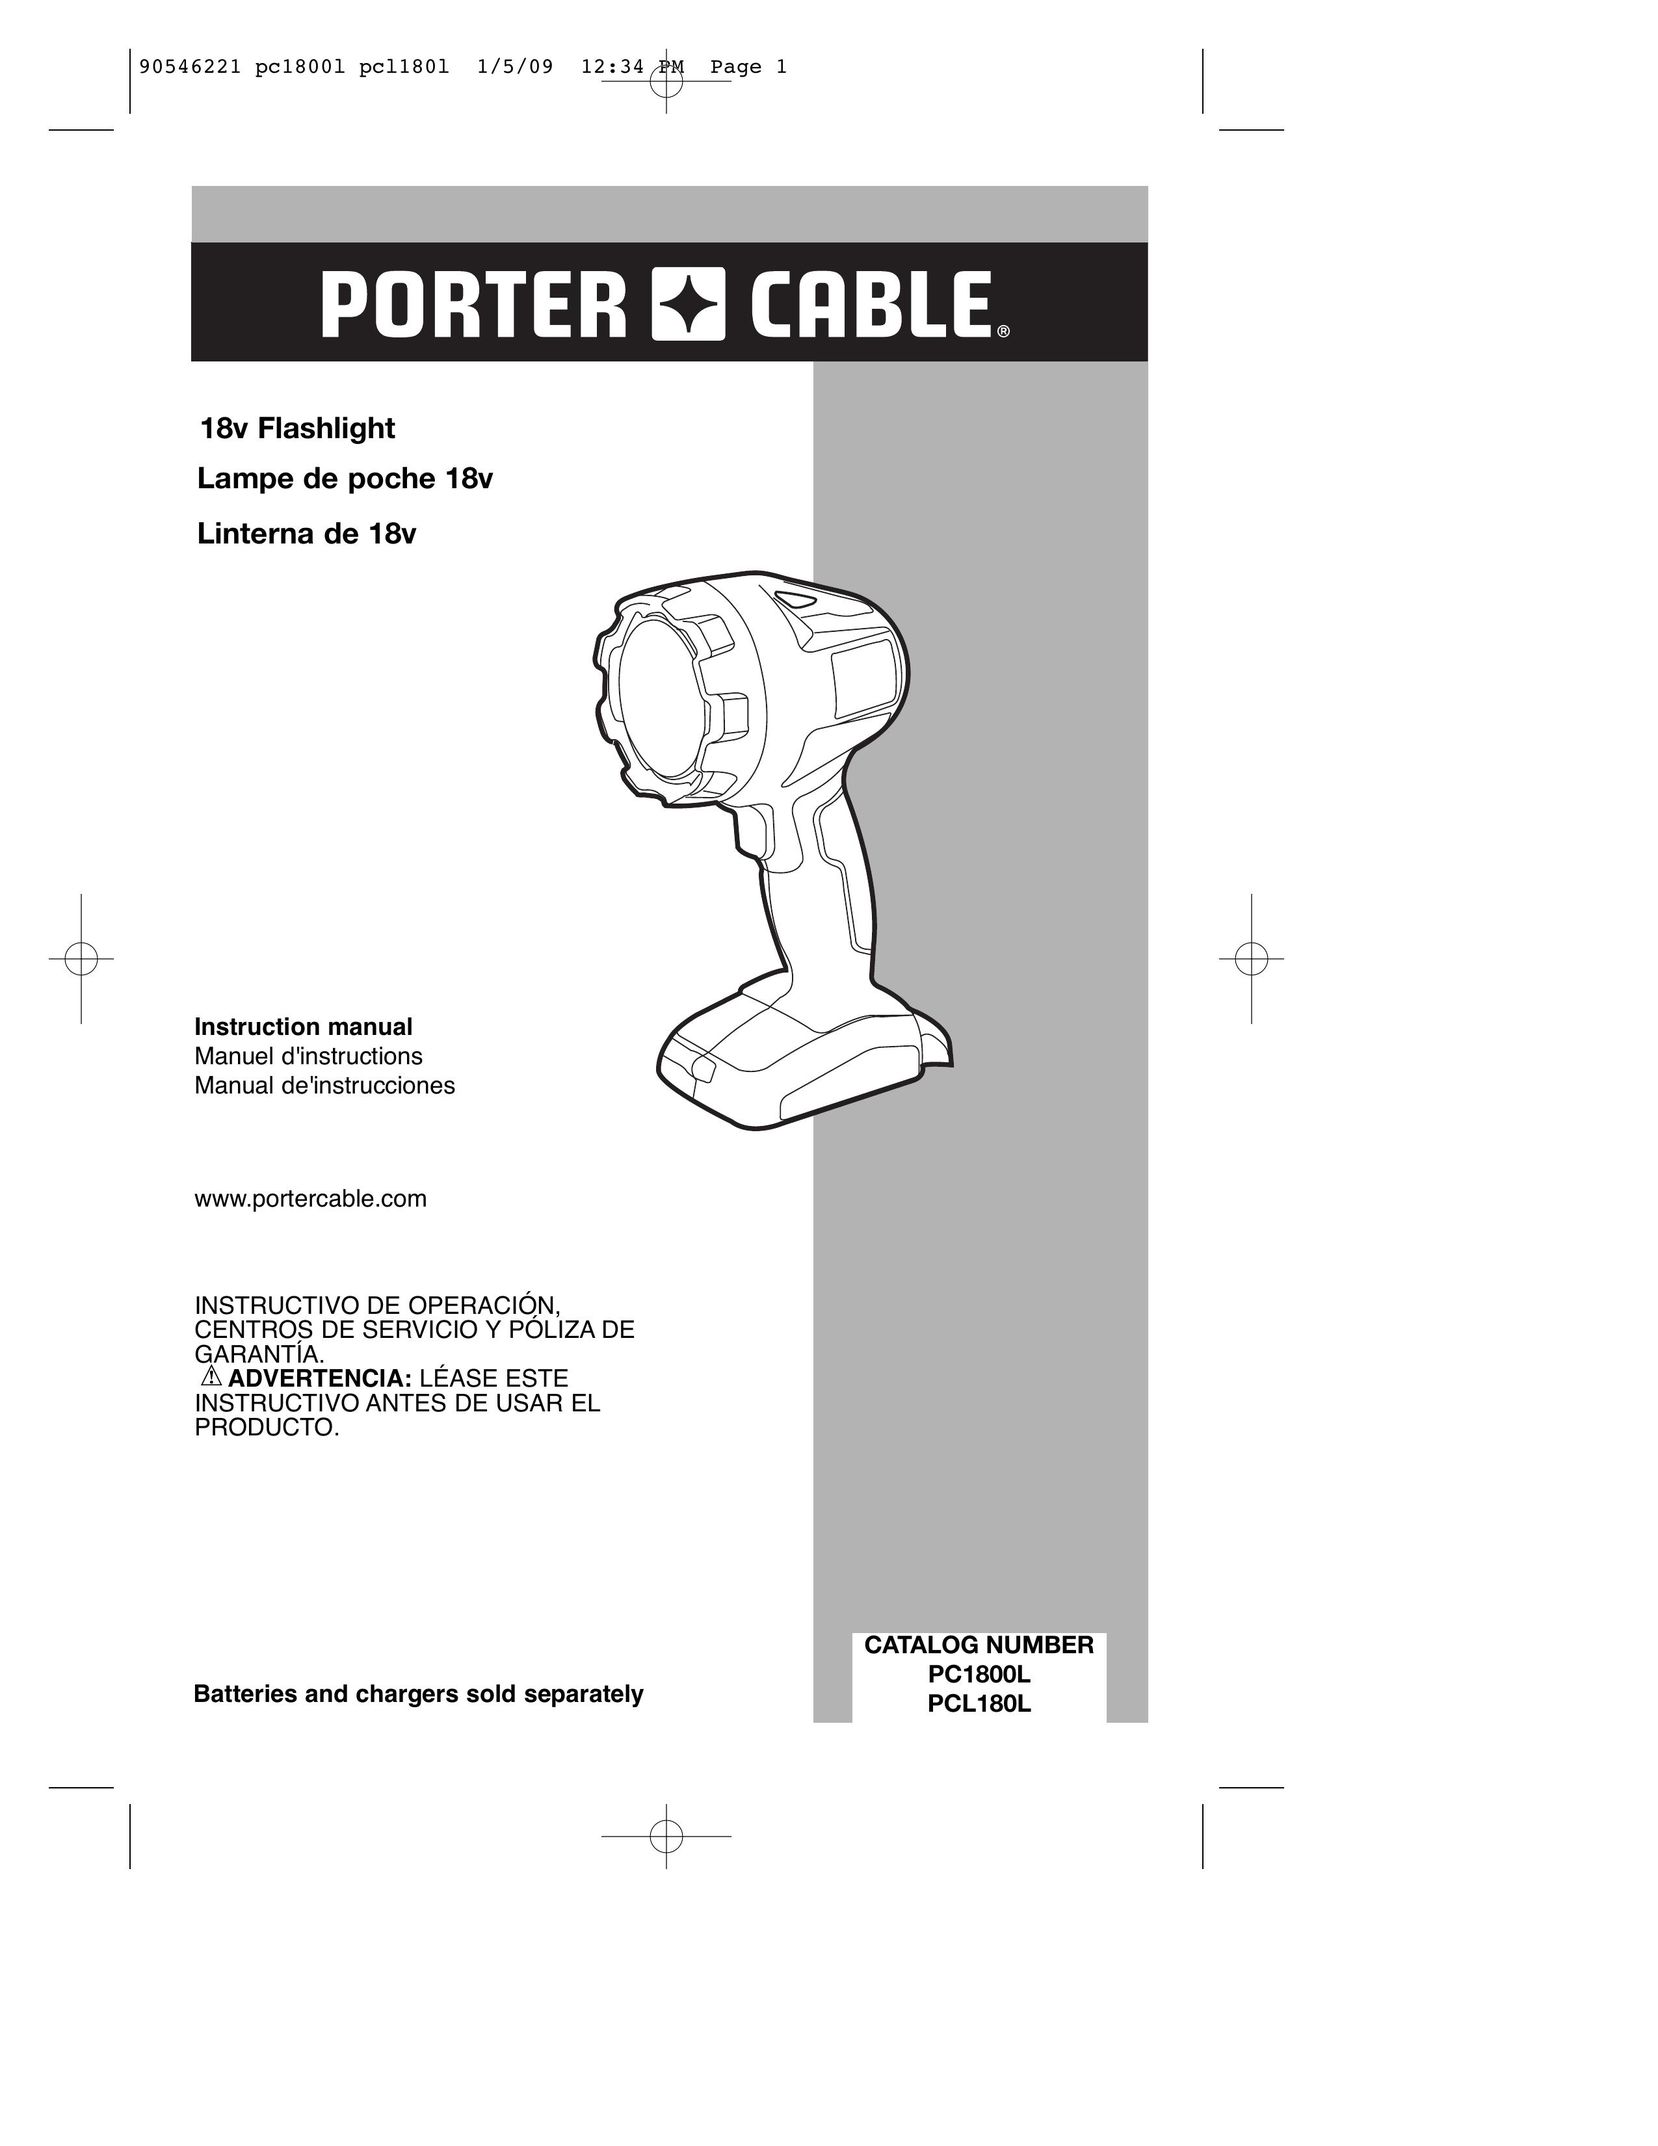 Porter-Cable PCL180L Home Safety Product User Manual